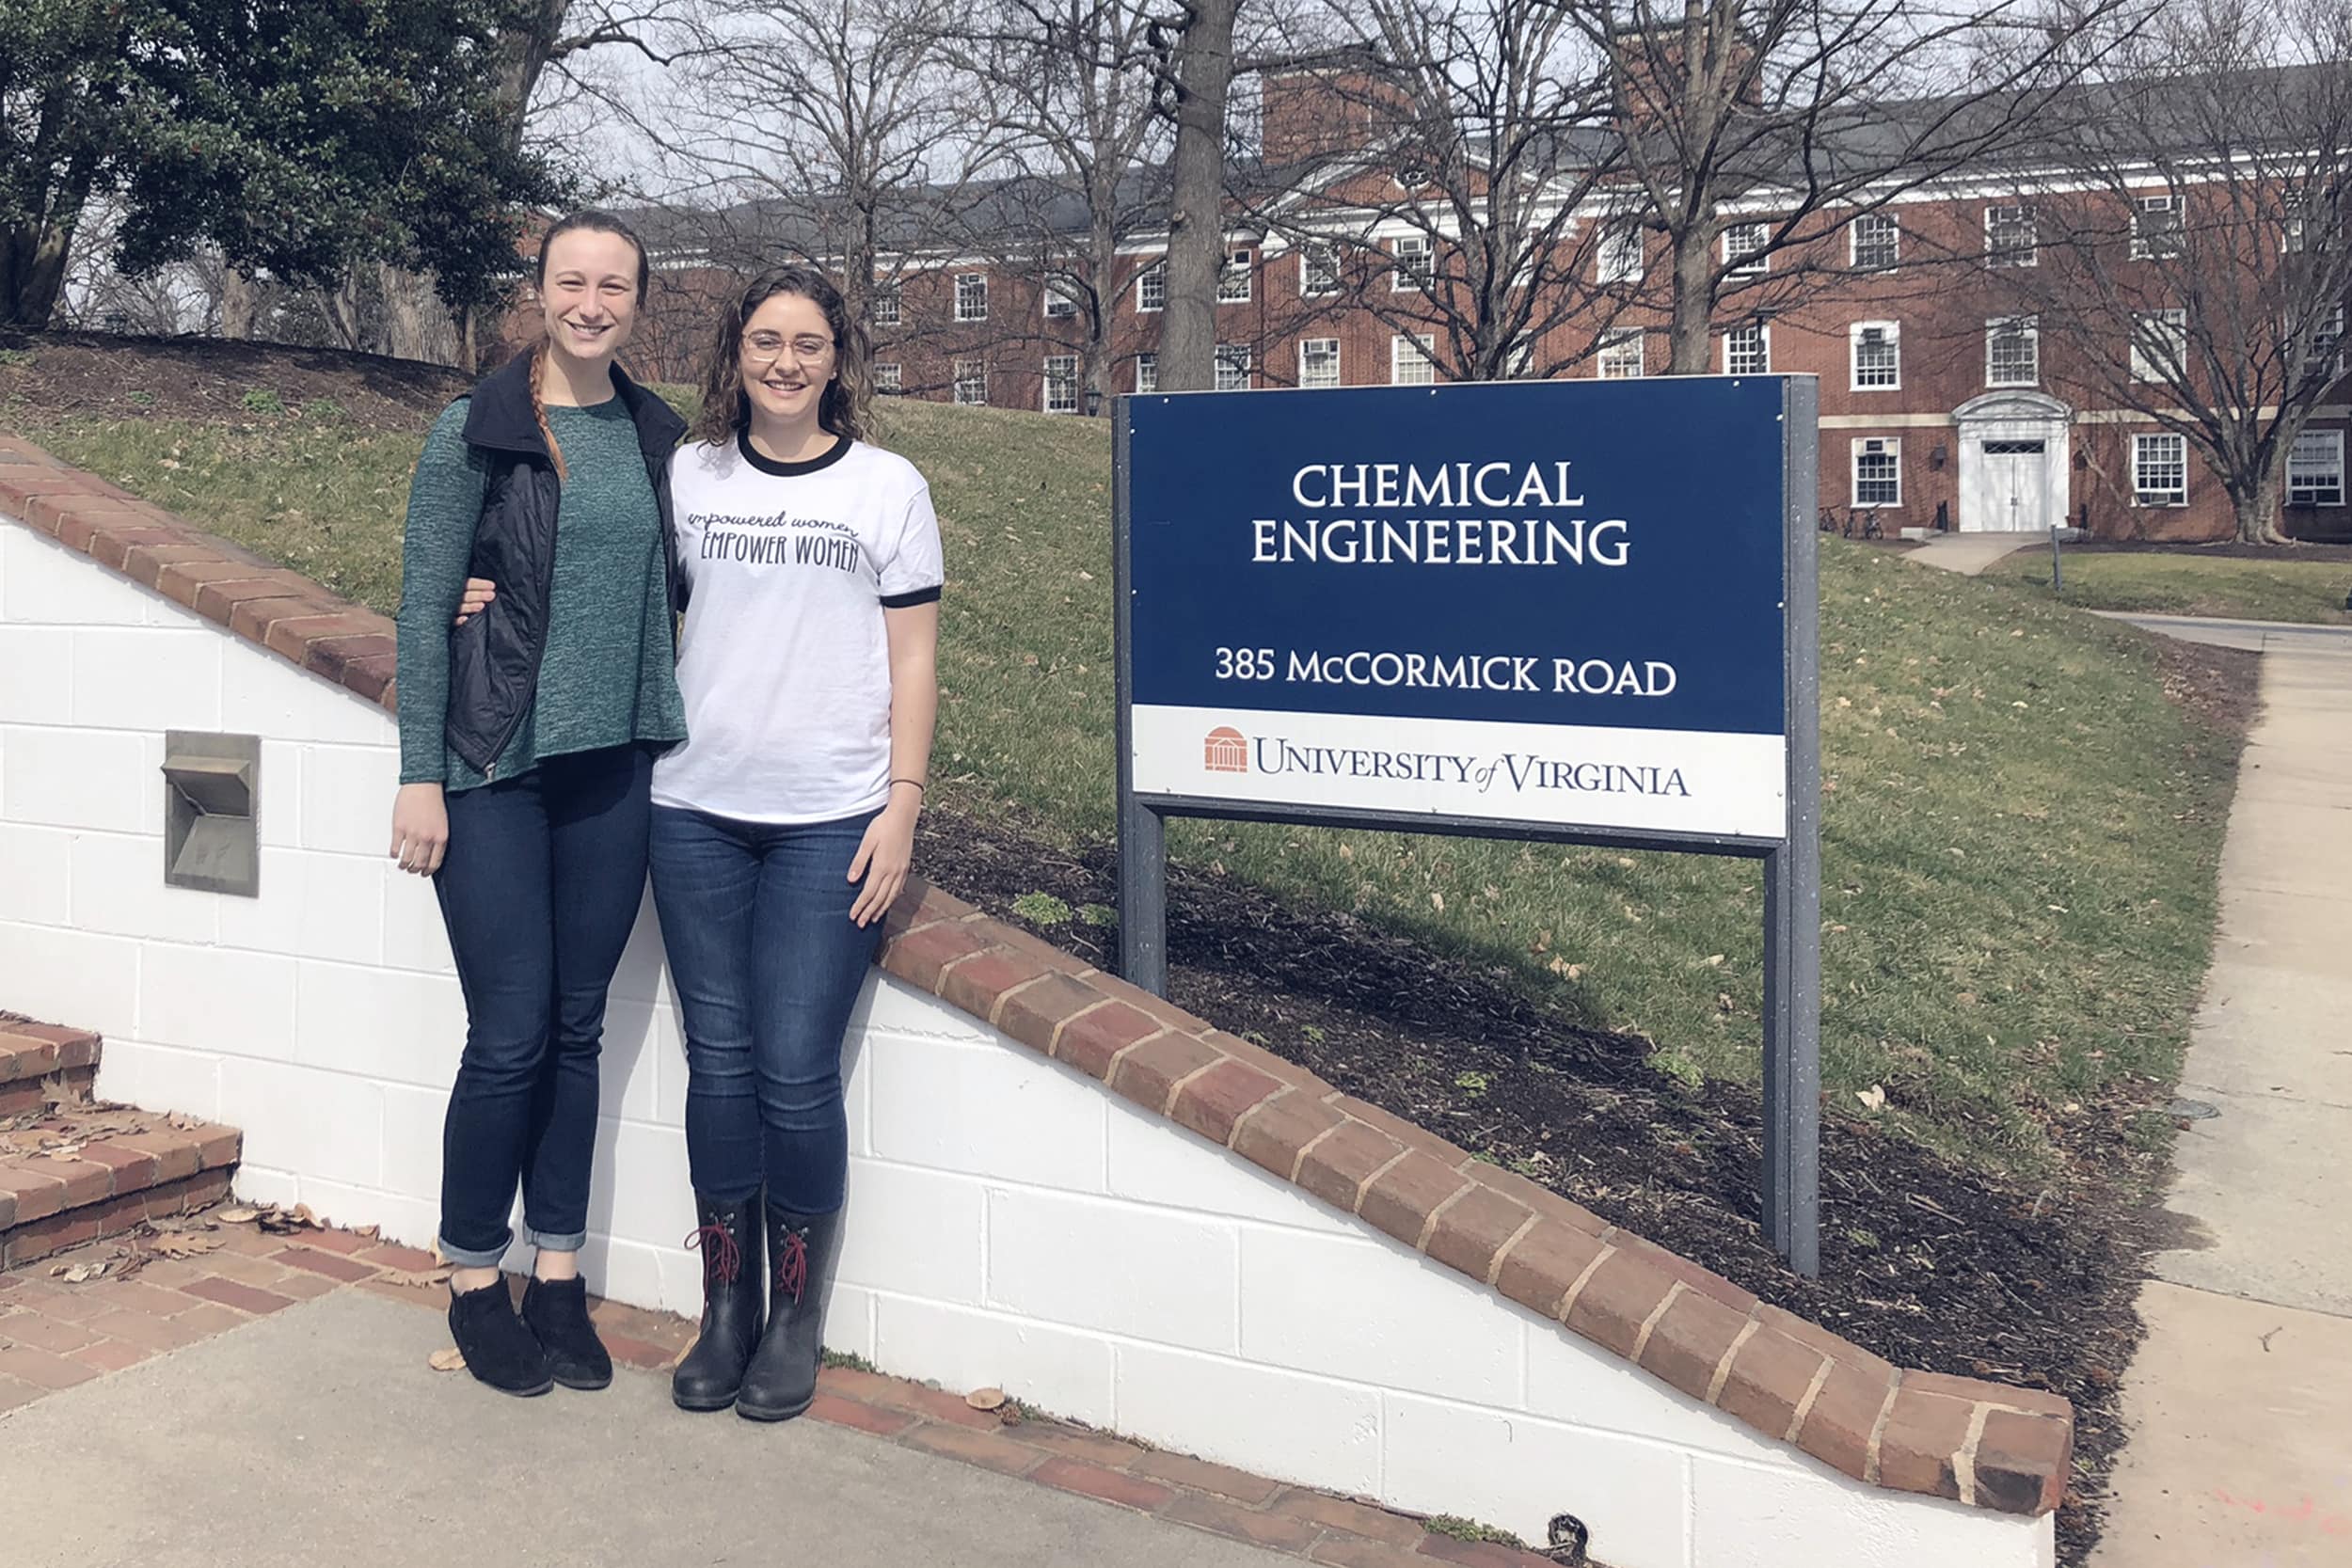 Bev Miller, left, and Rebecca Earhart stand next to the Chemical Engineering building sign for a picture